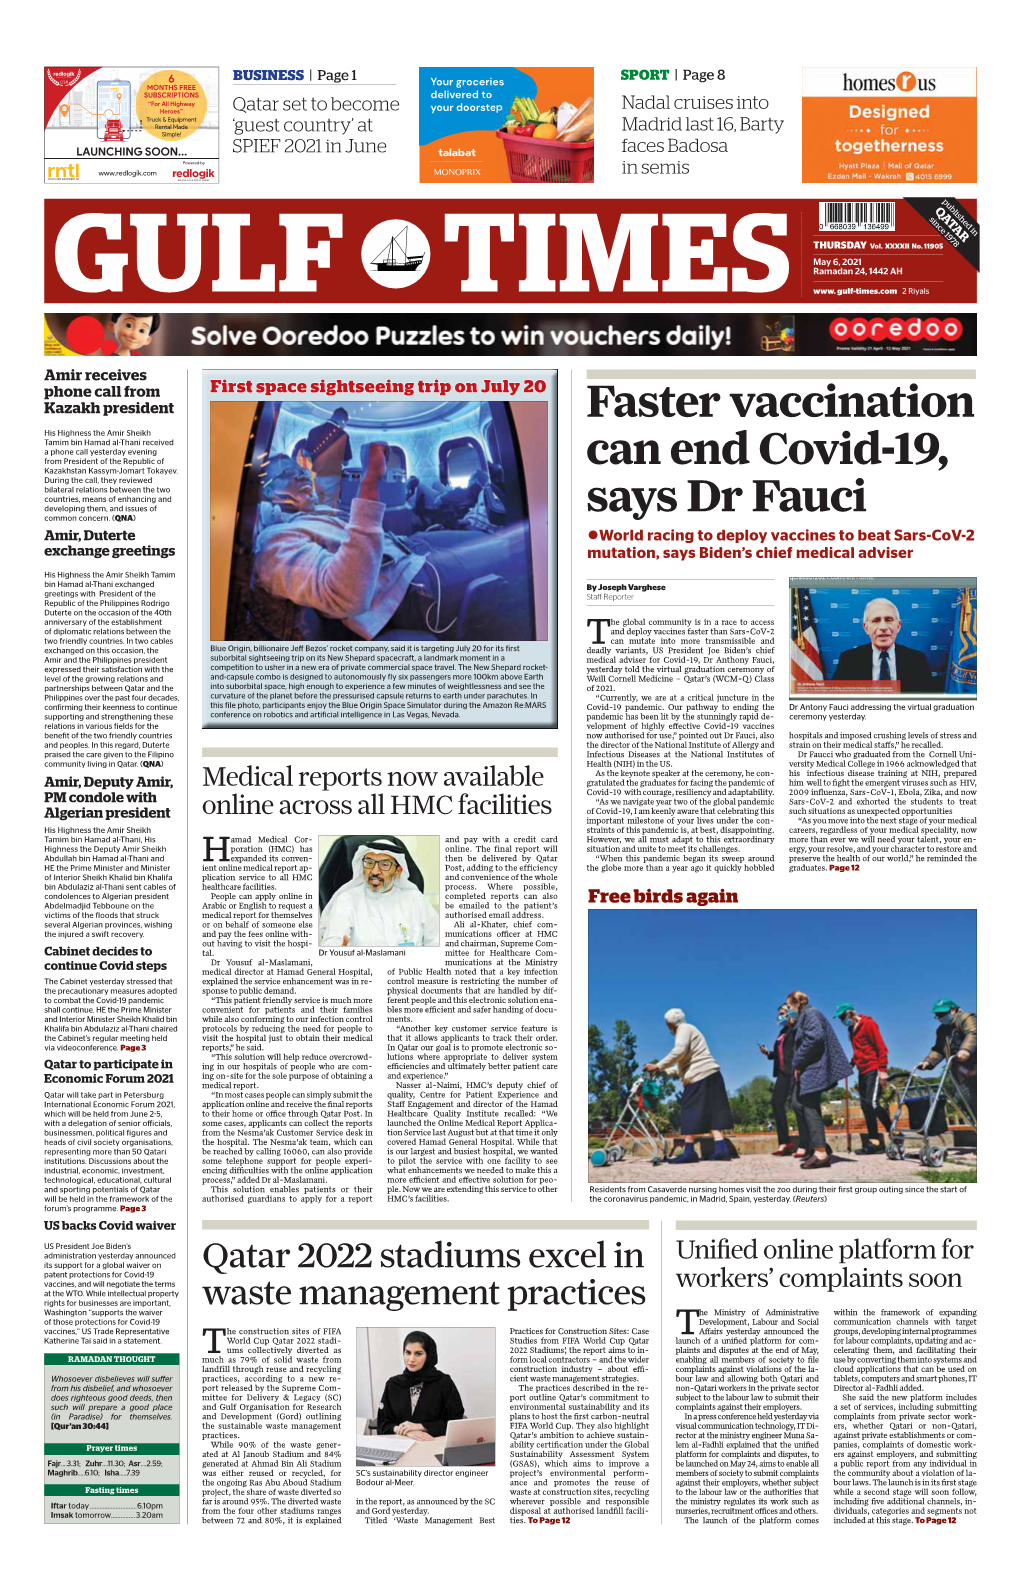 Faster Vaccination Can End Covid-19, Says Dr Fauci